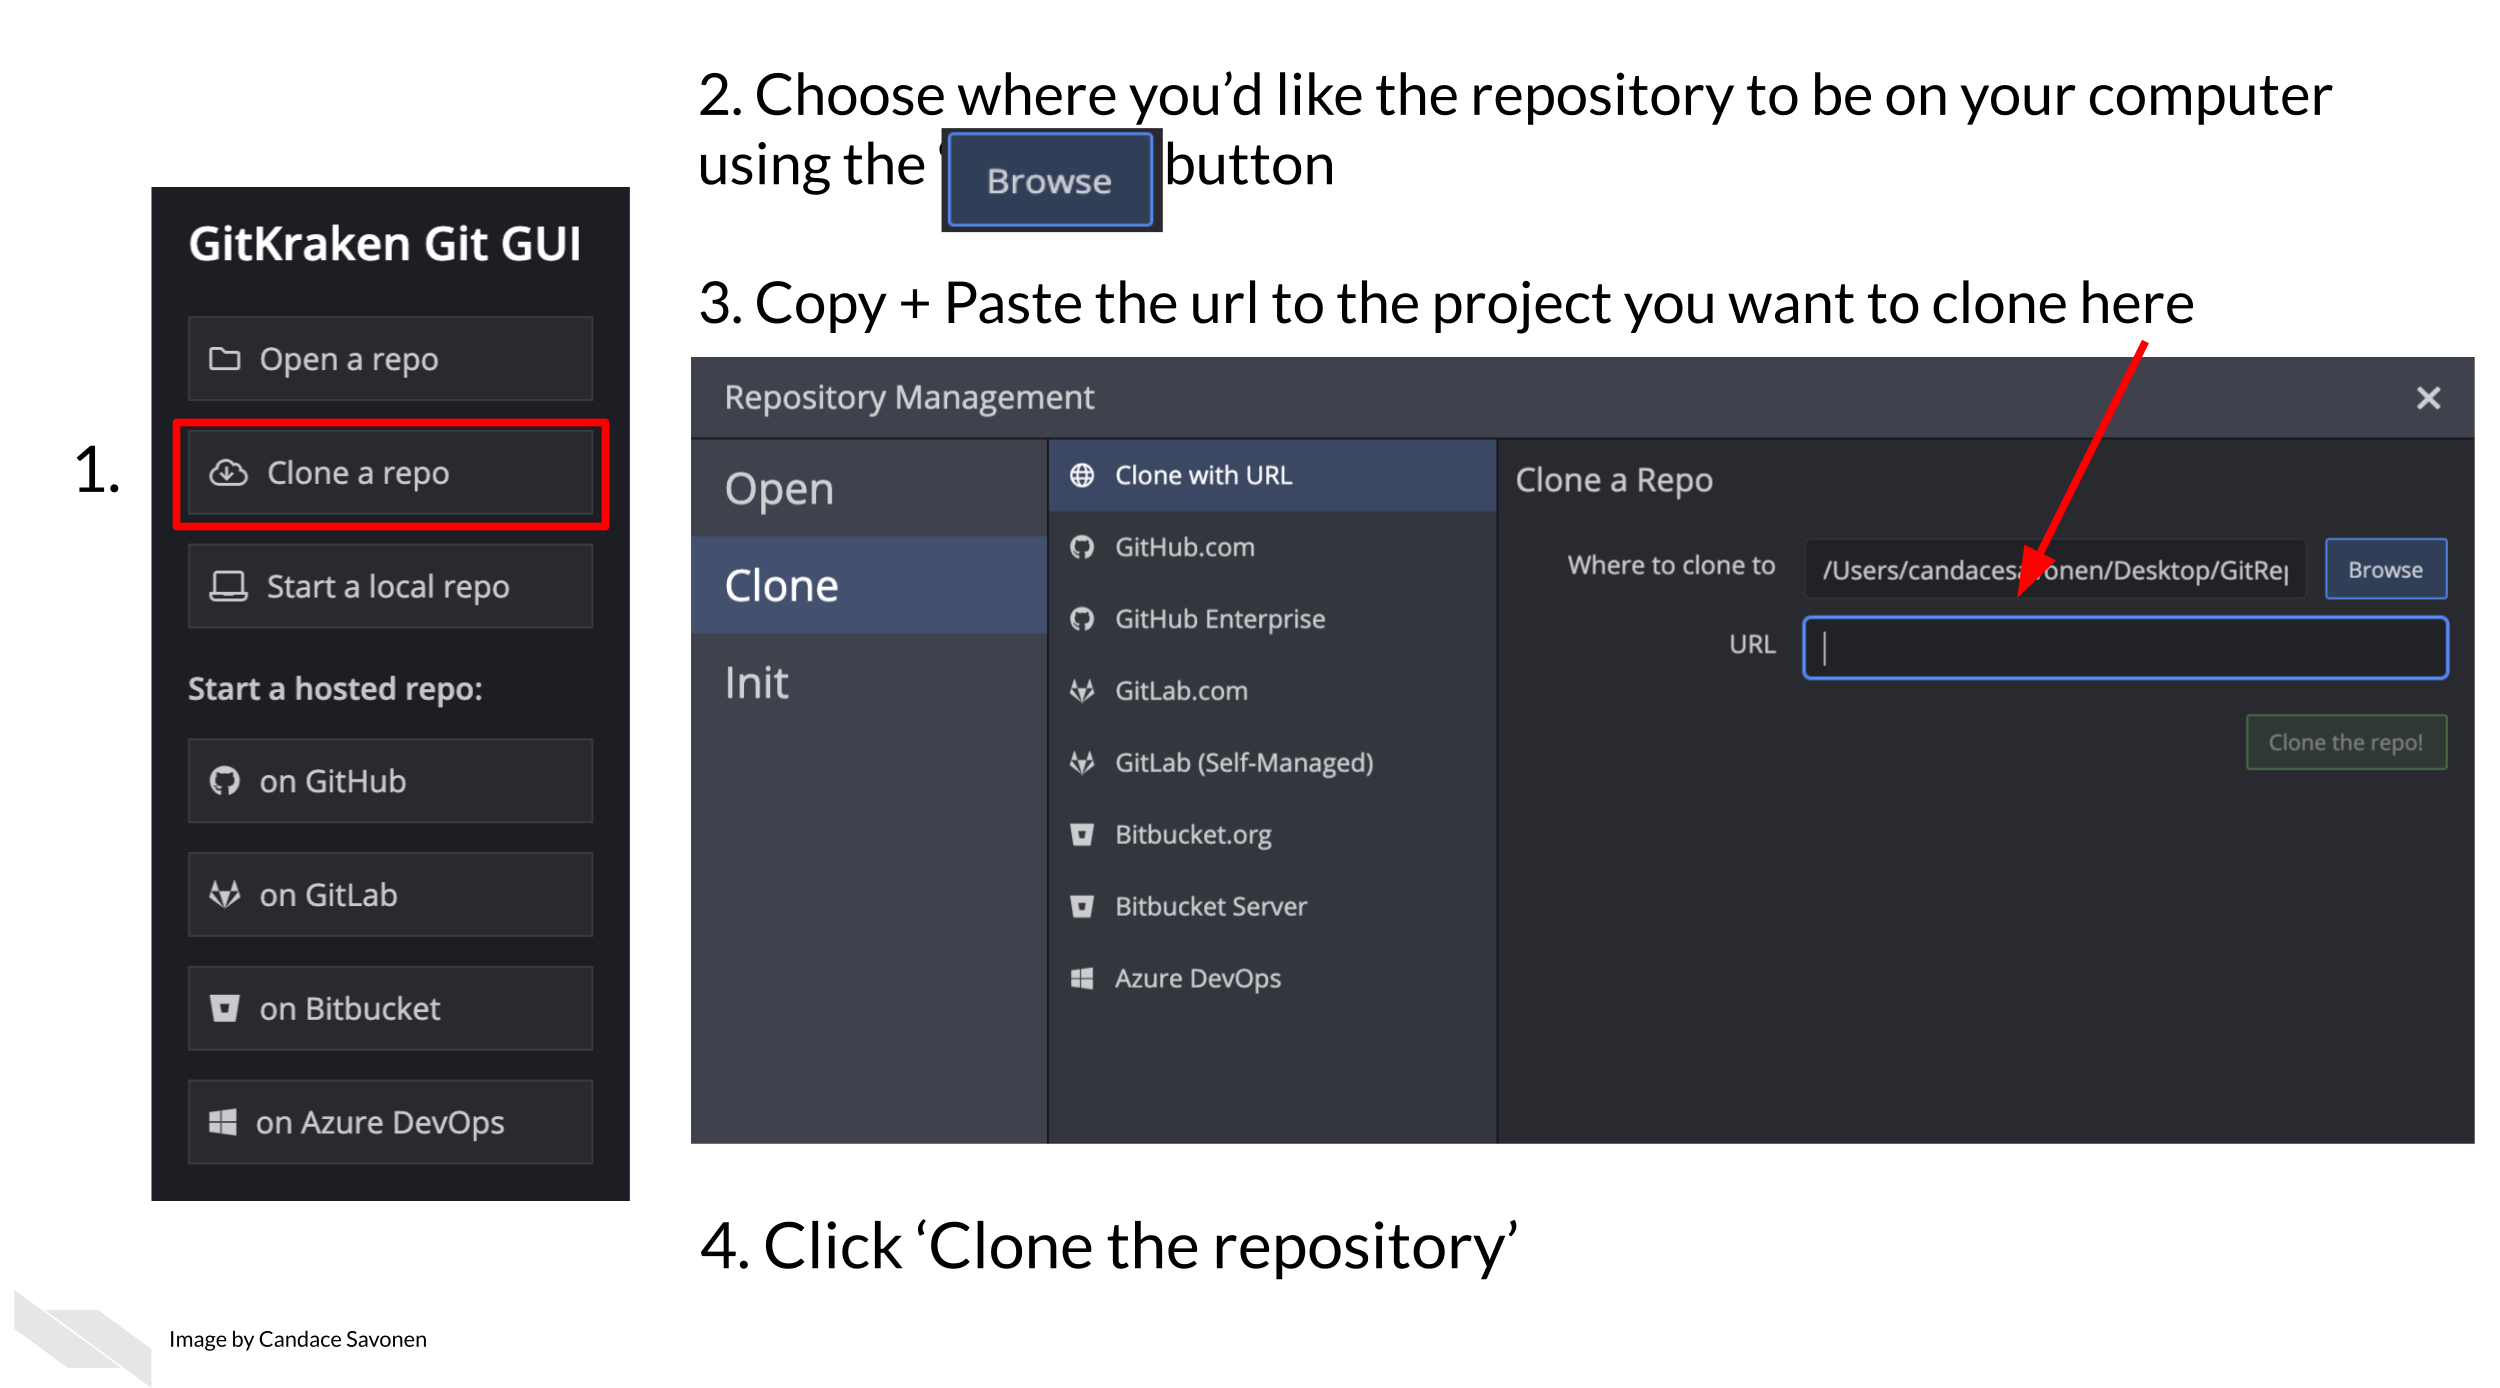 To clone a GitHub repository, using GitKraken. First, Click Clone a repo. Then, choose where you’d like the repository to be on your computer using the ‘Browse’ button. Then Copy + Paste the url to the project you want to clone where it says ‘URL’. Then click `Clone the repository’.